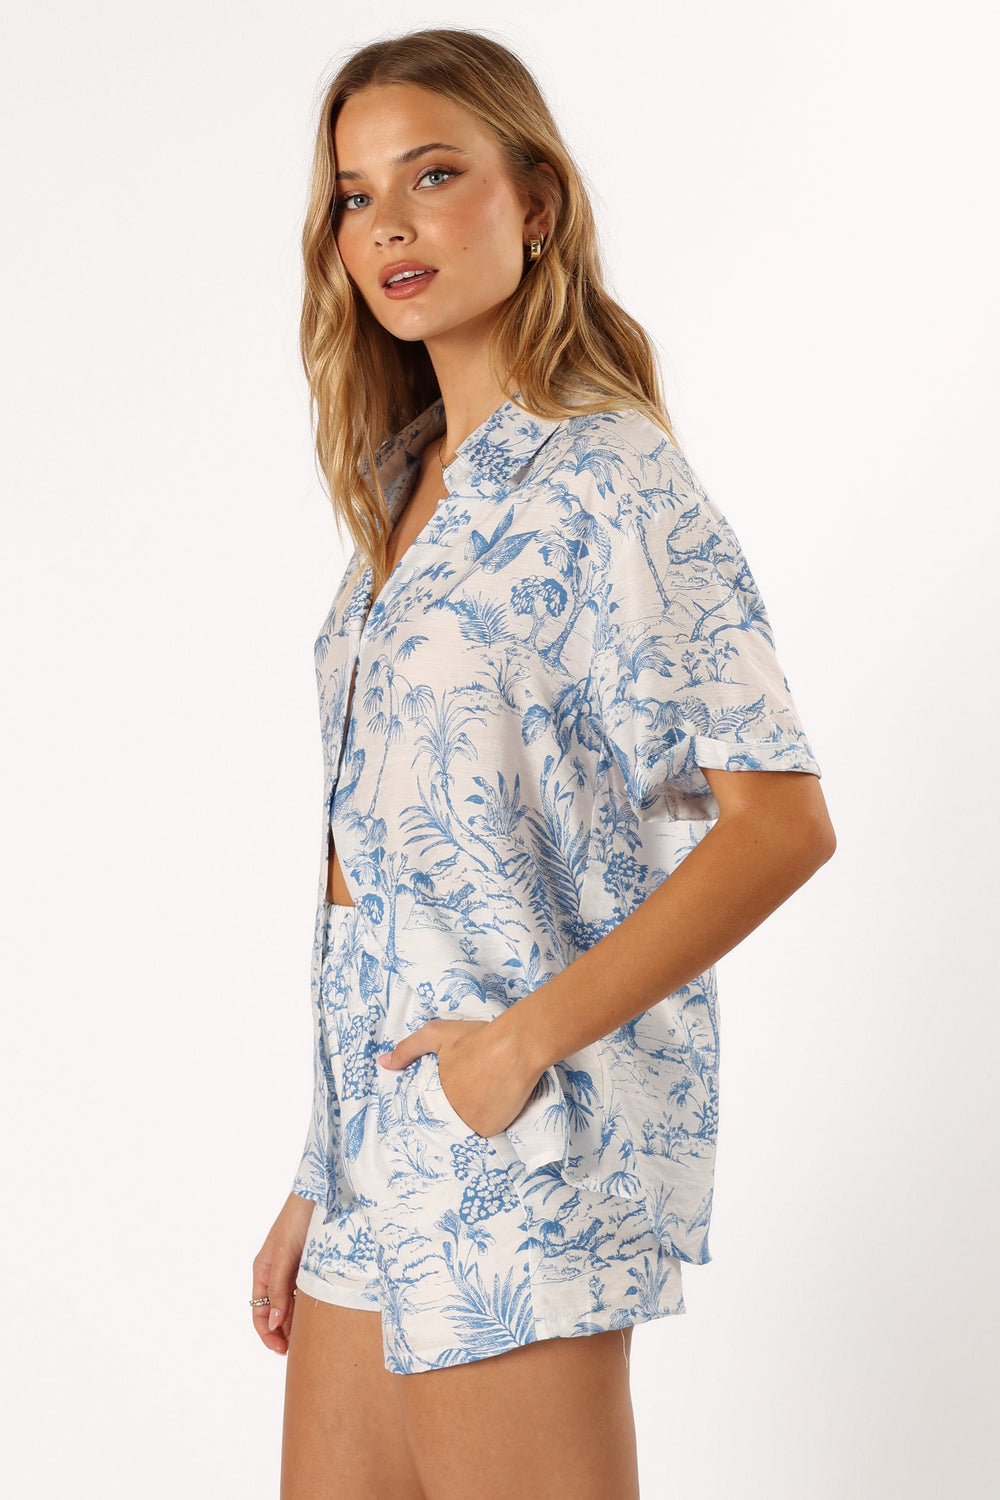 Petal and Pup USA TOPS Faye Button Down Top - White Blue